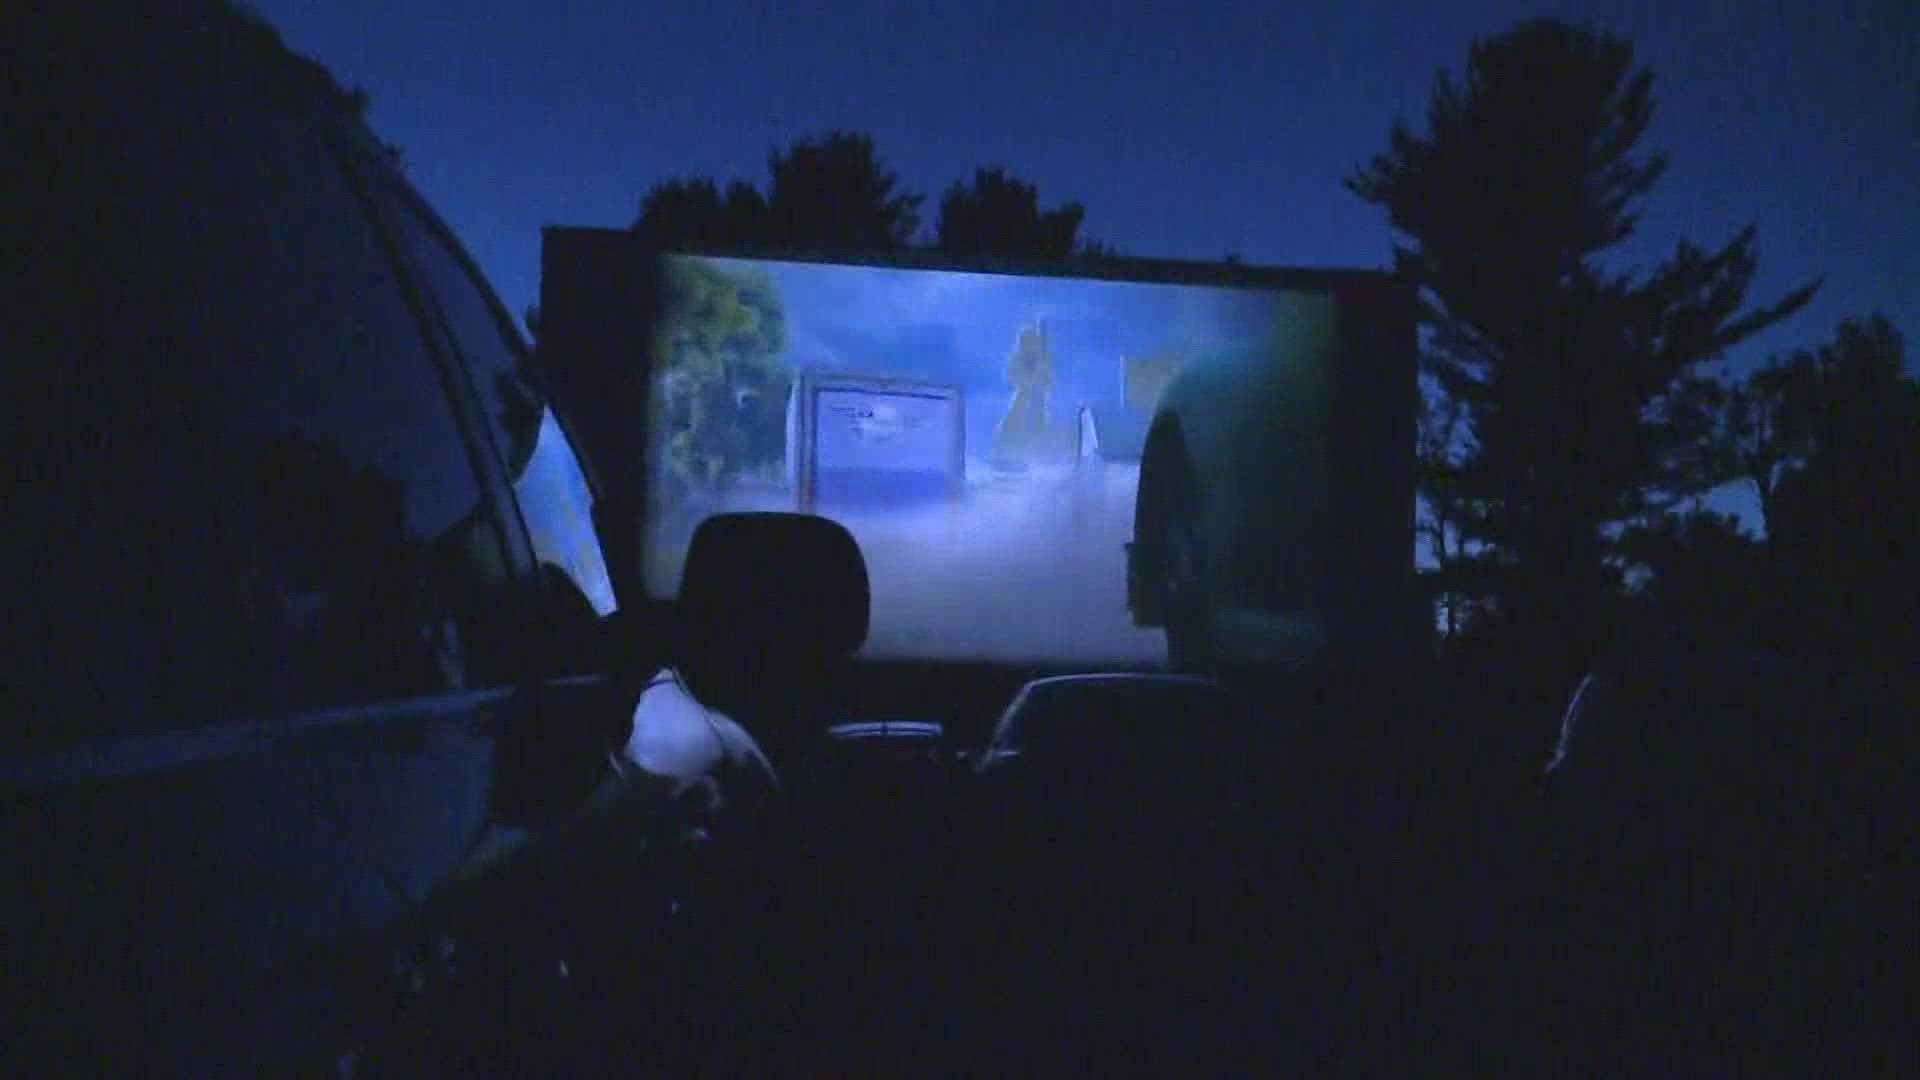 As online streaming services such as Netflix and Hulu provide alternatives to seeing movies without leaving our homes, drive-in theaters are on their way out.